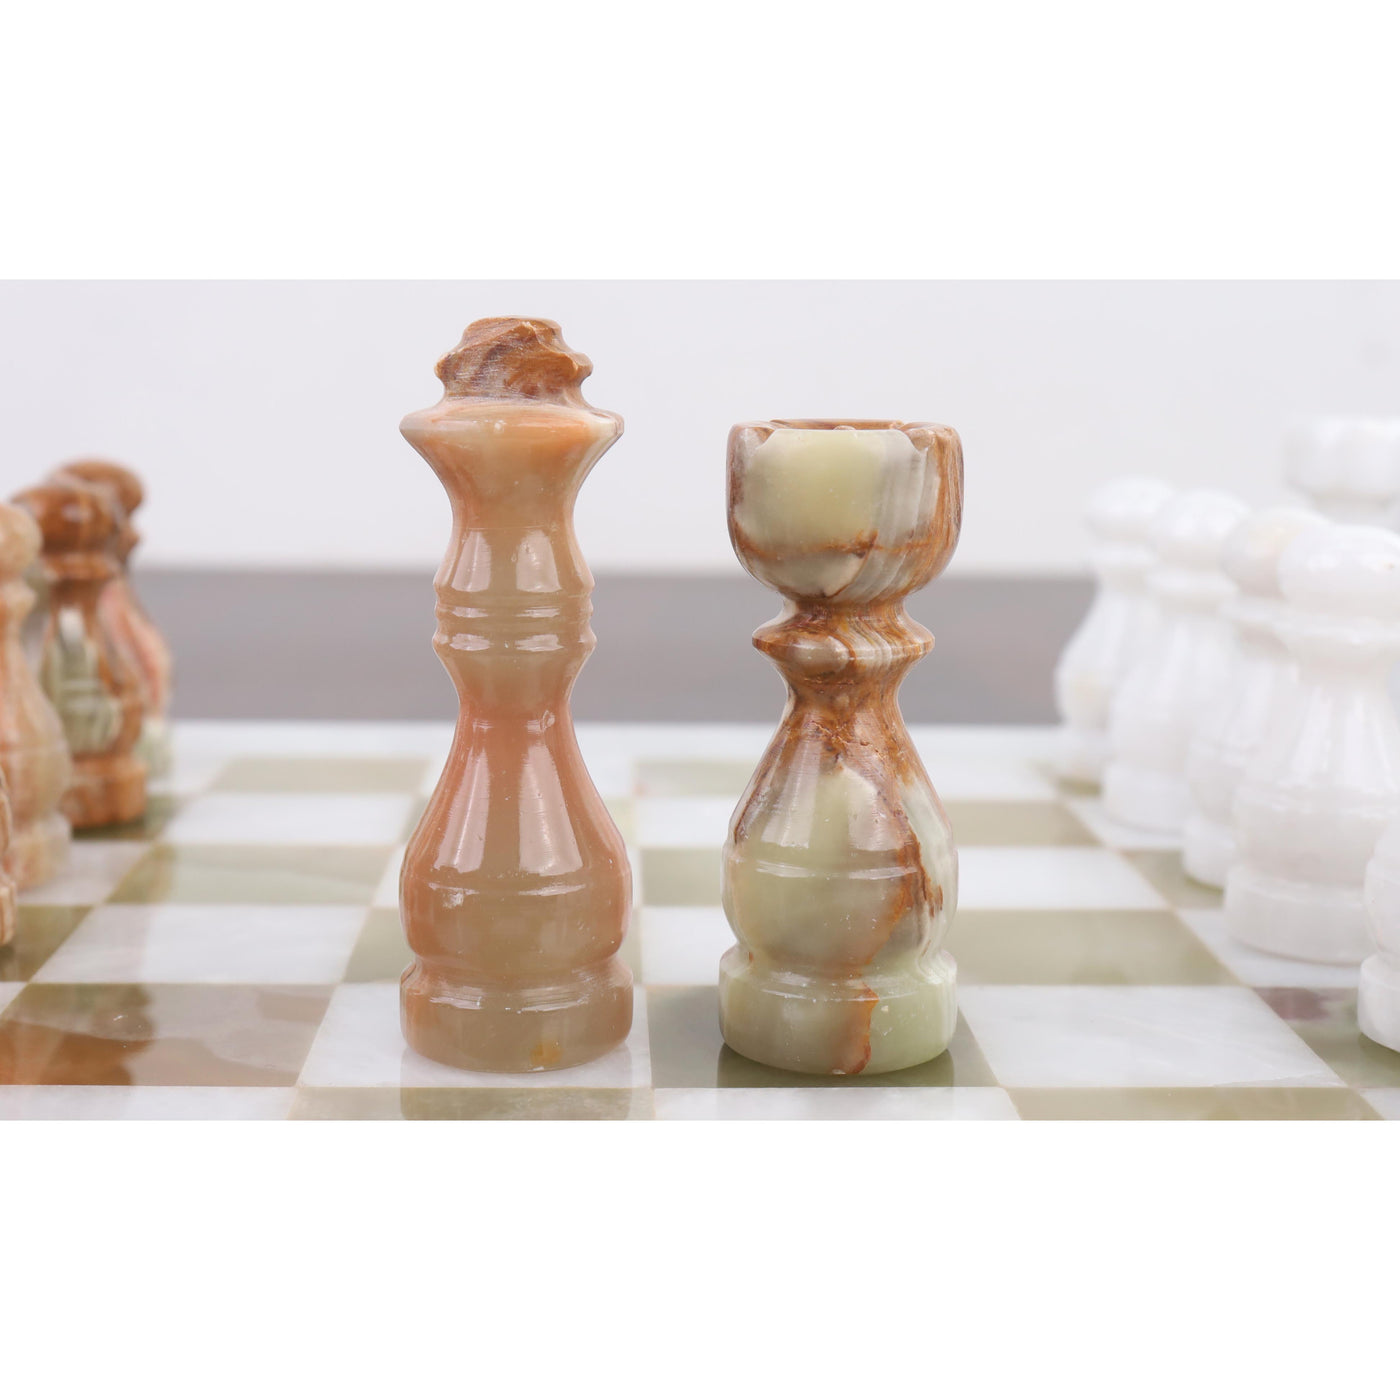 Onyx Marble & Stone Chess Pieces & Board Combo Set - 12" - Handcrafted Chess Set